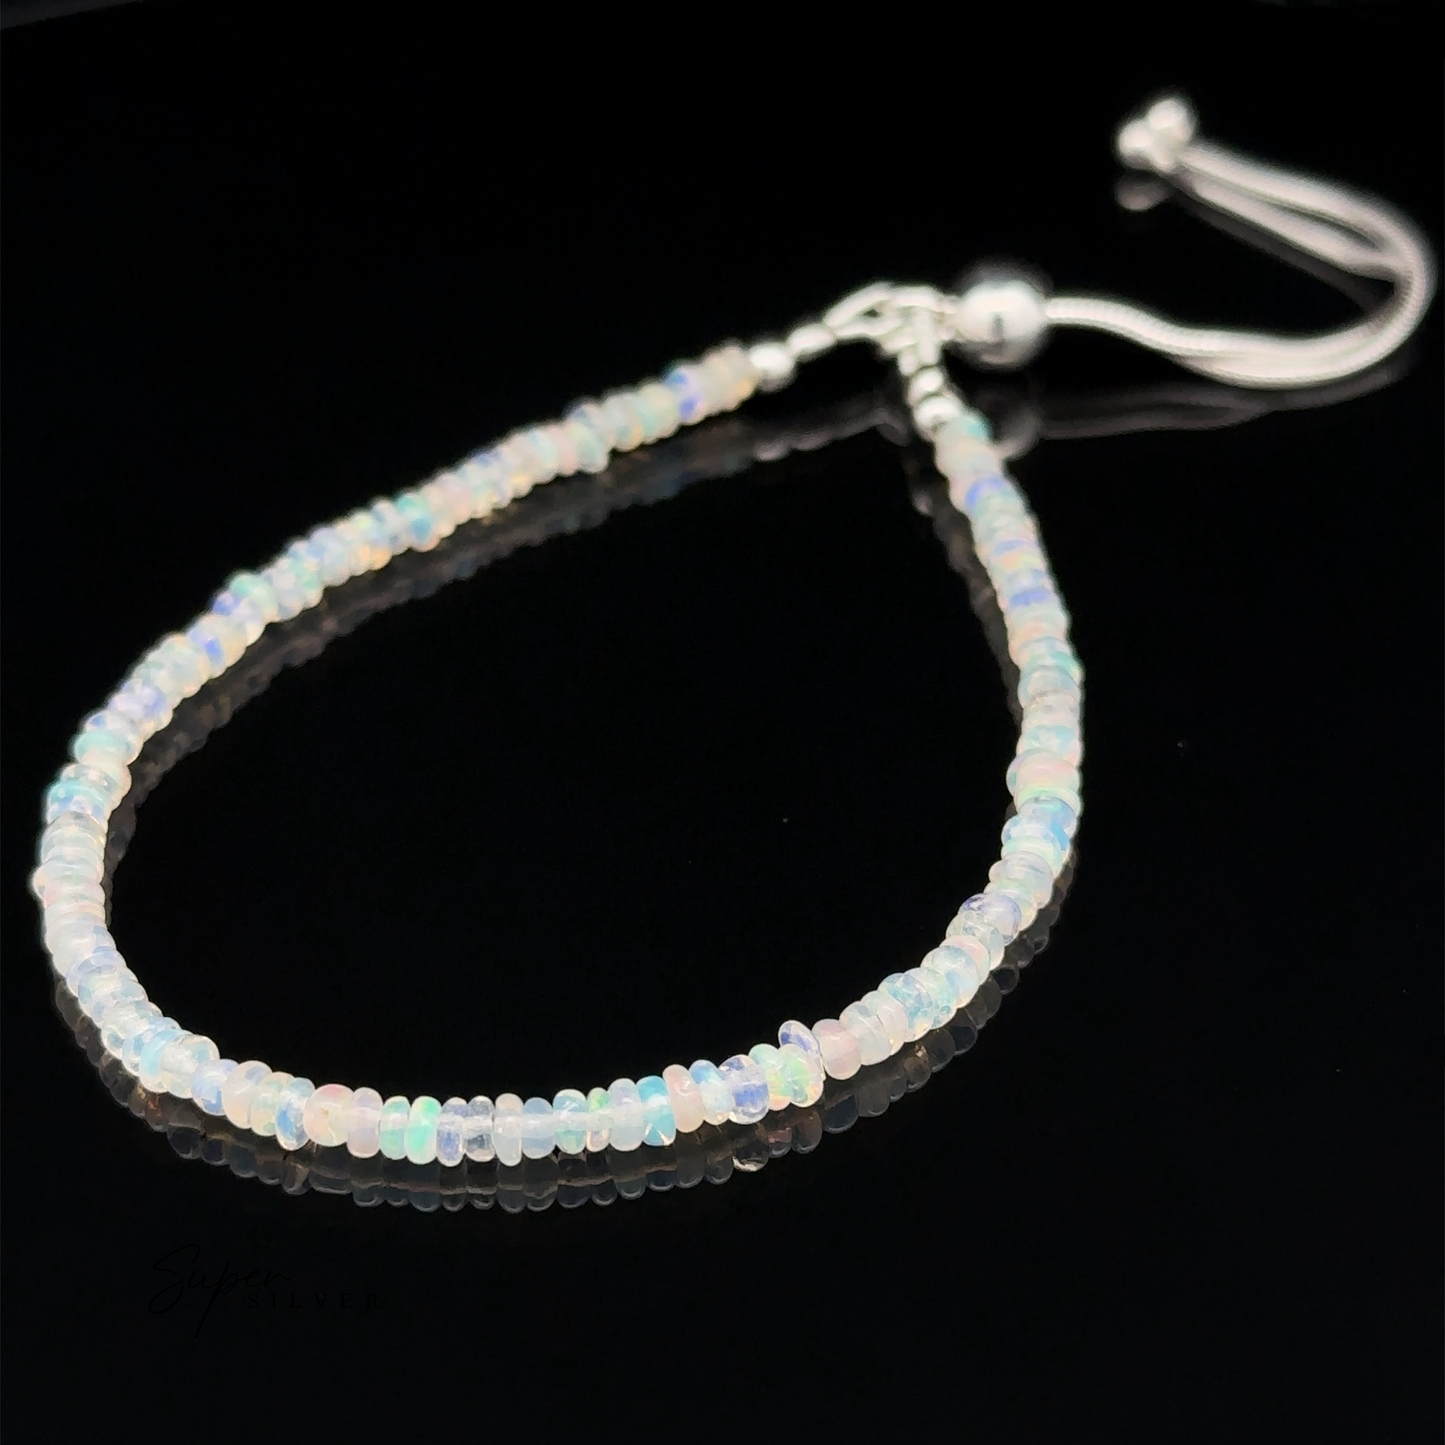 
                  
                    A delicate Ethiopian Opal Beaded Bracelet with an adjustable length closure is displayed on a black surface. The beaded bracelet features small, translucent beads in a variety of soft, iridescent colors.
                  
                